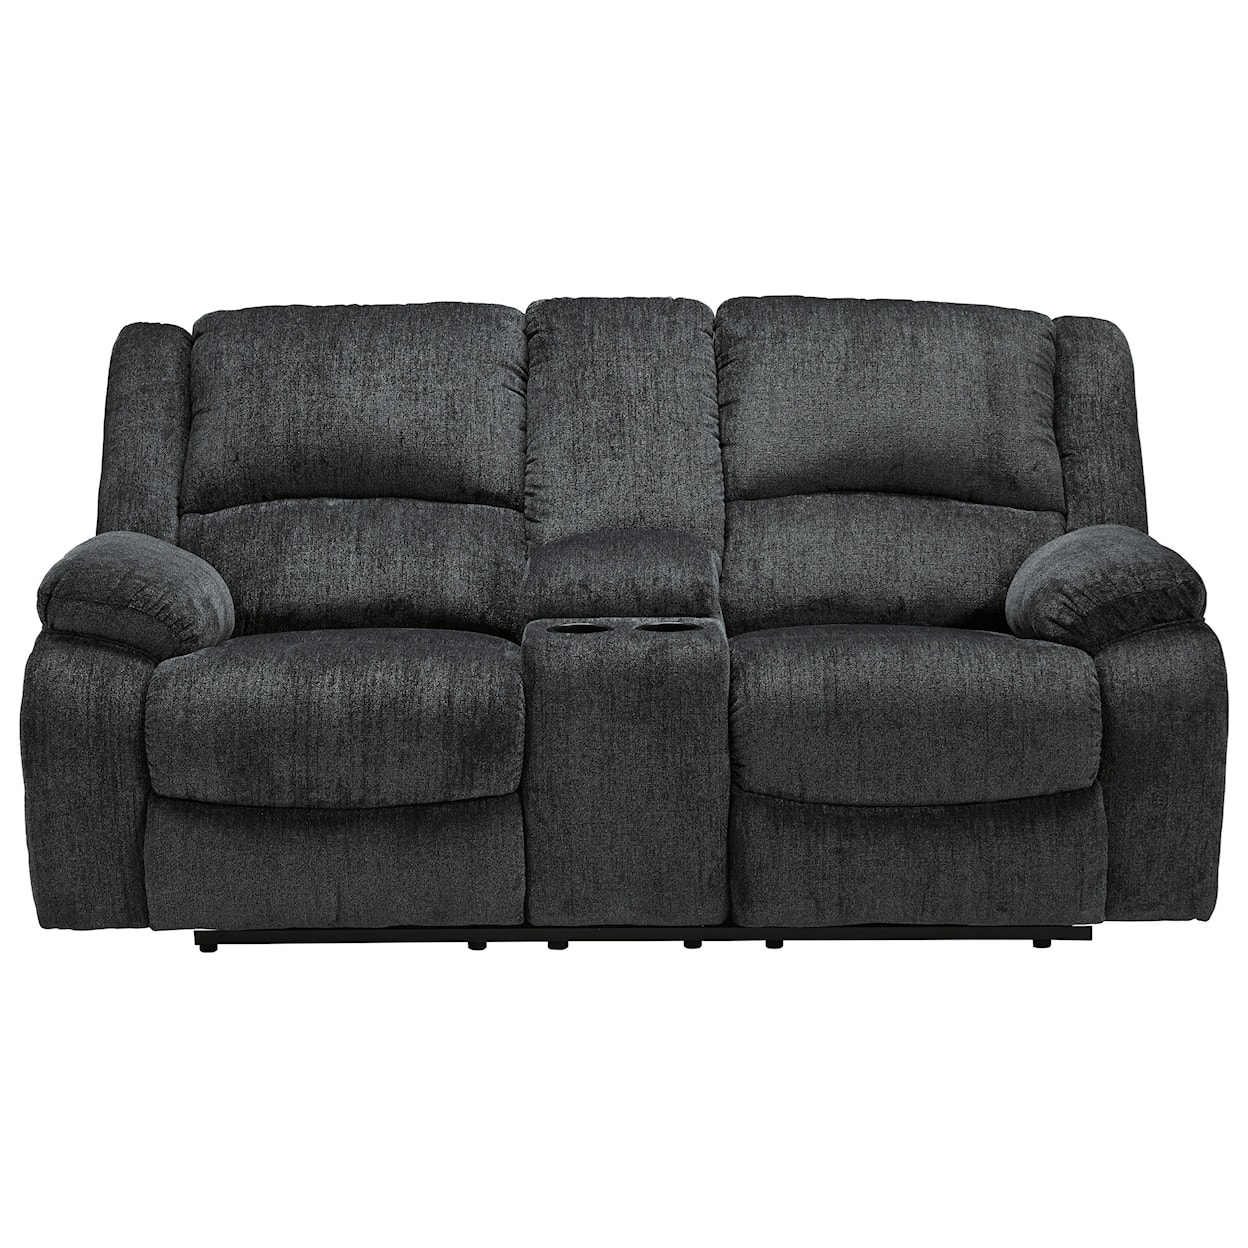 Benchcraft Draycoll Double Reclining Power Loveseat w/ Console